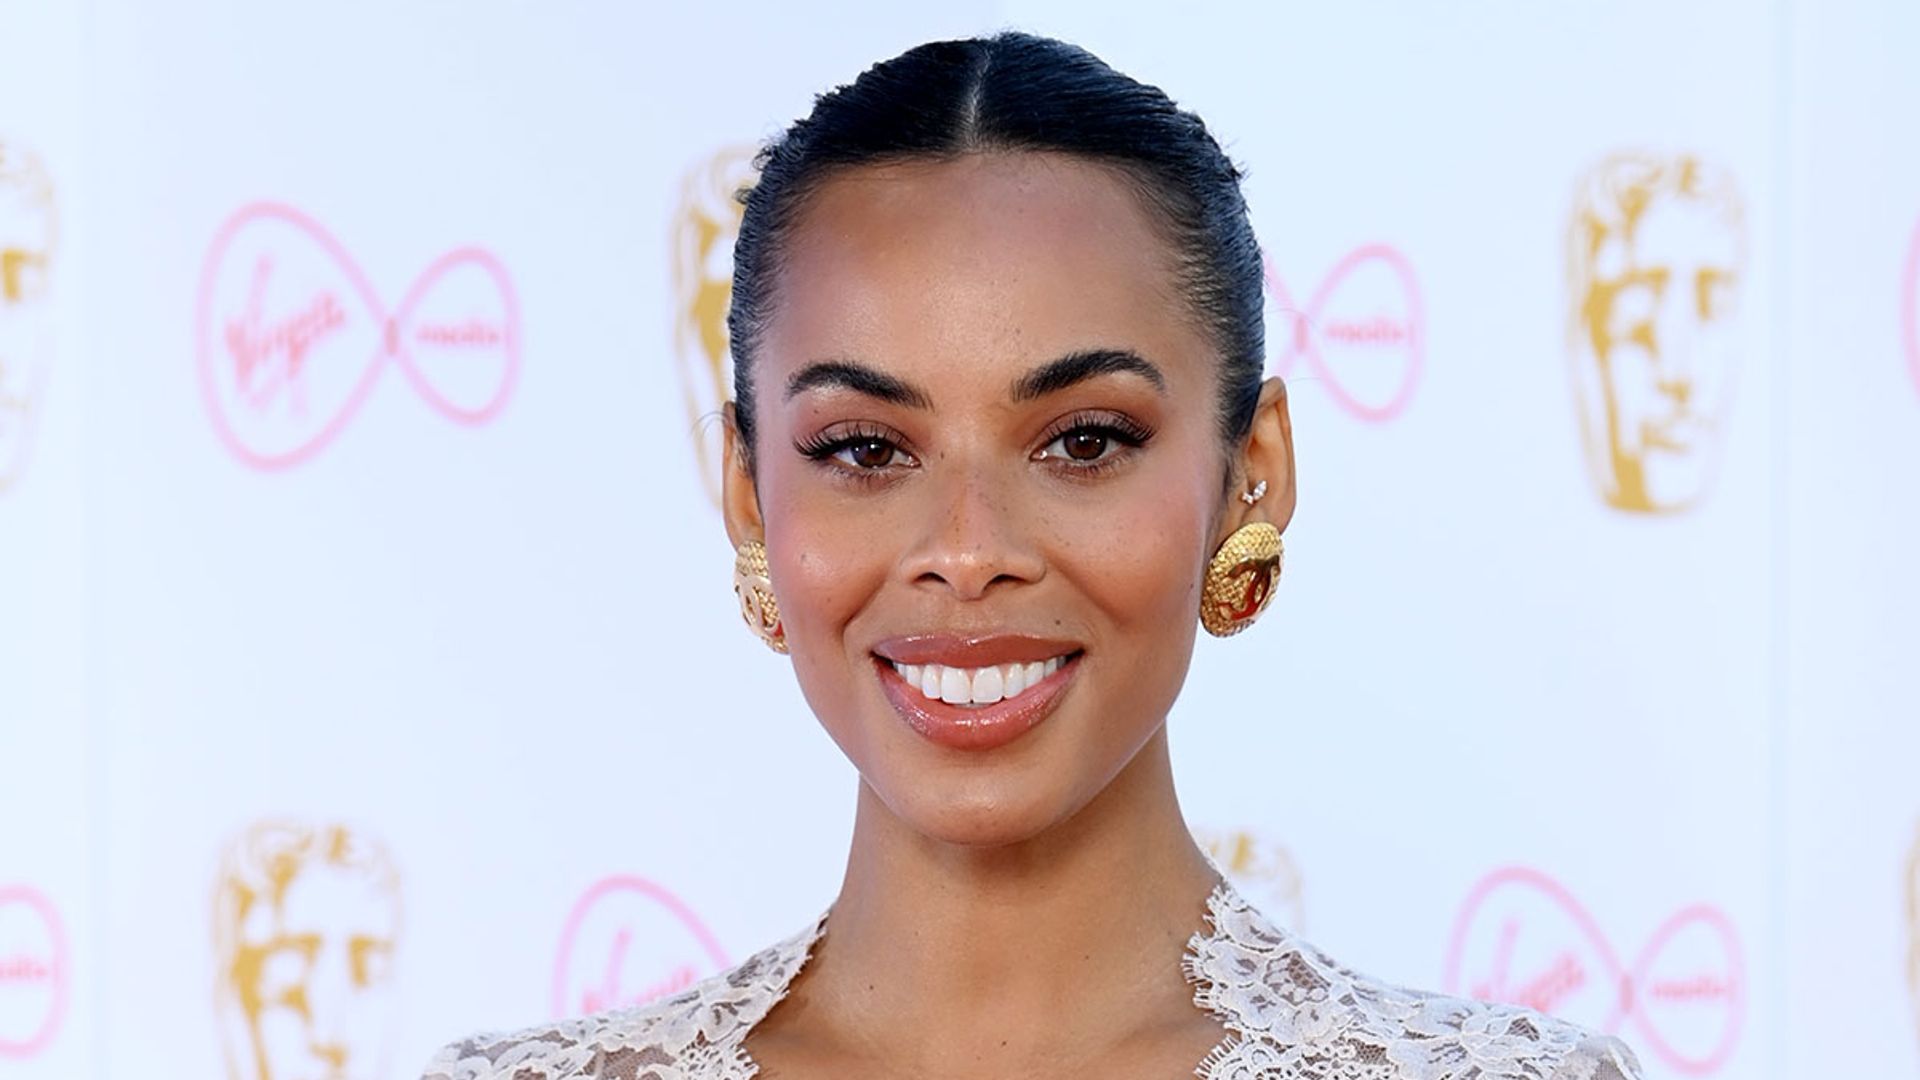 Rochelle Humes wows fans with Clueless moment - and looks unreal